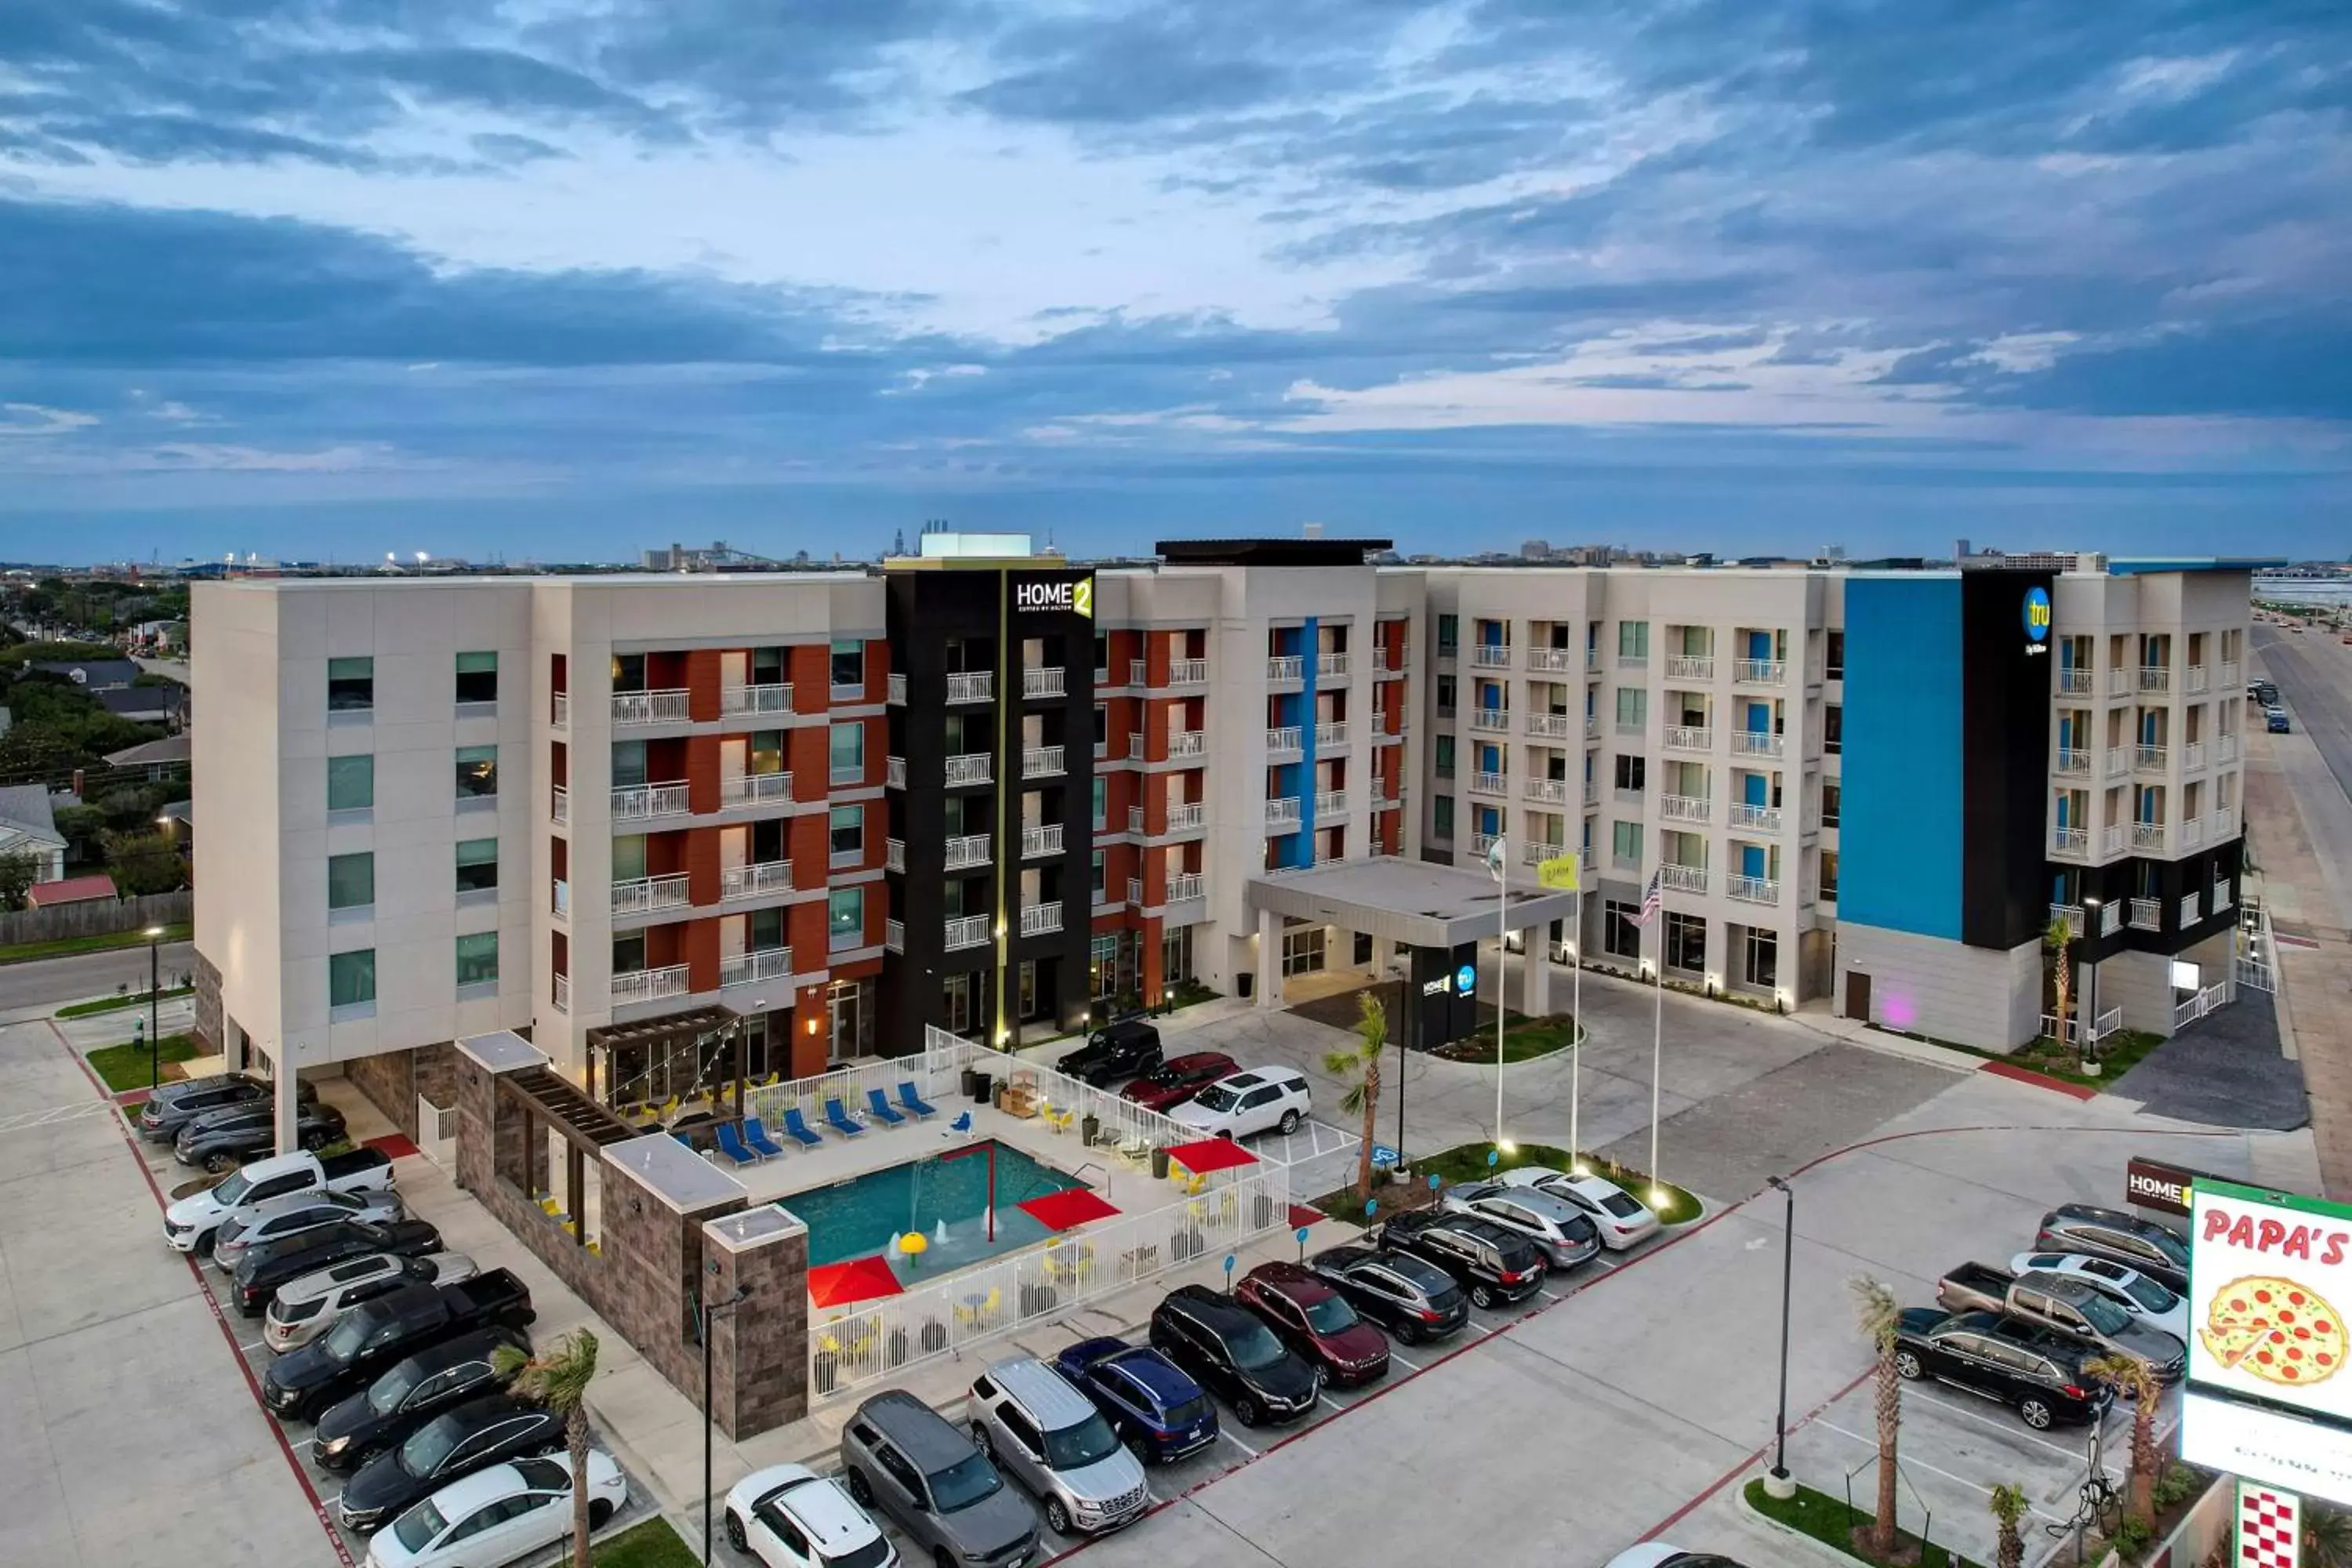 Property building, Pool View in Home2 Suites Galveston, Tx